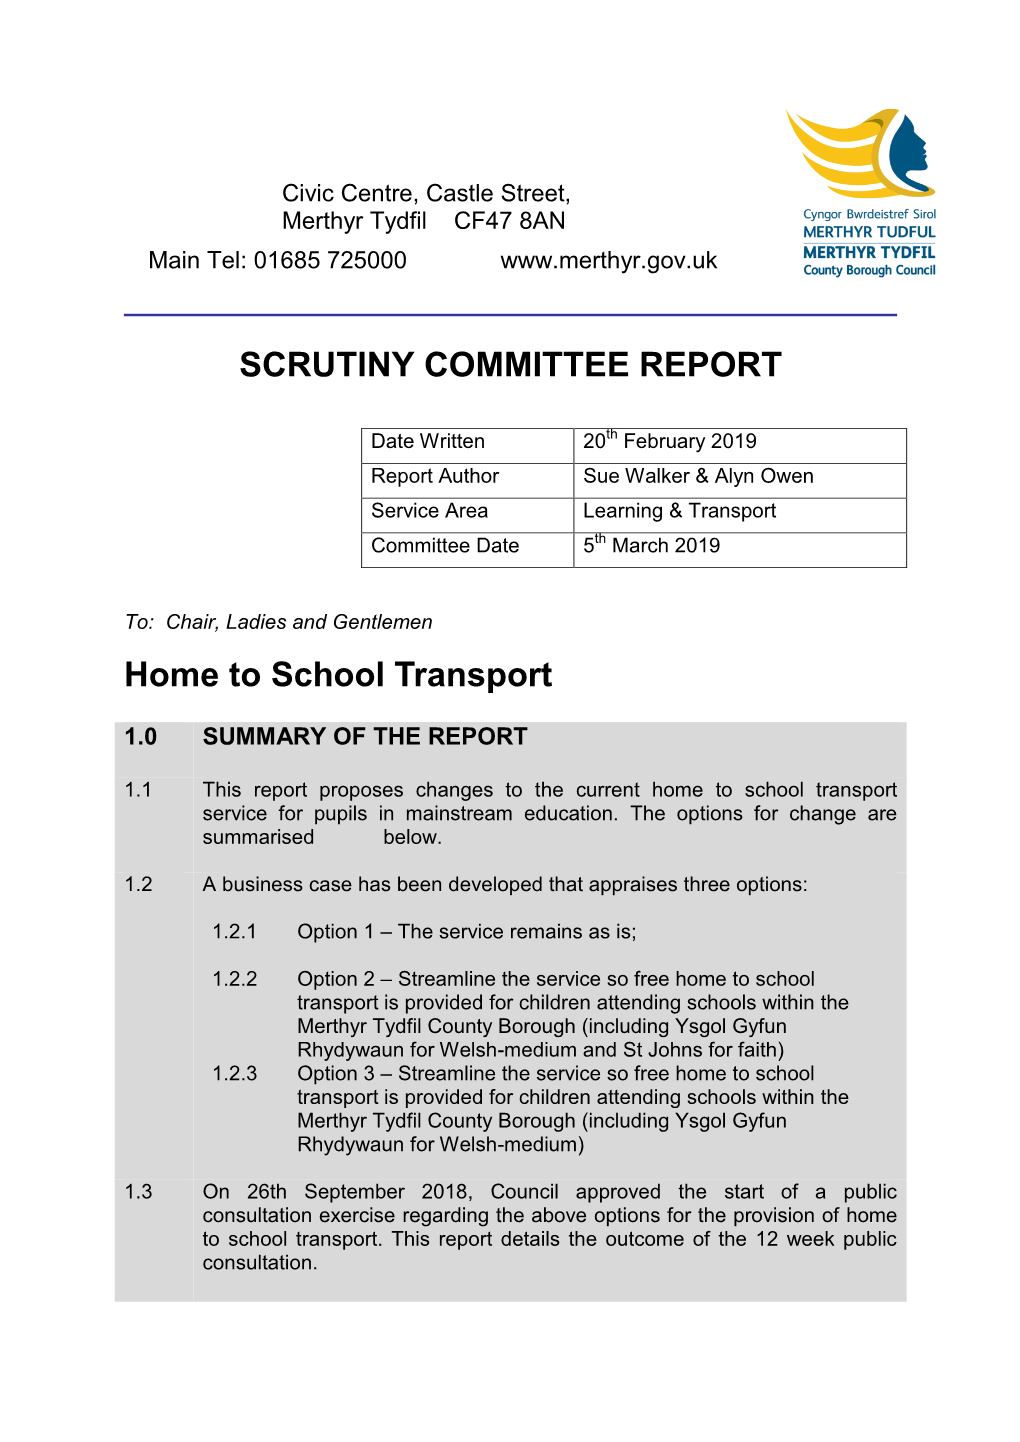 SCRUTINY COMMITTEE REPORT Home to School Transport